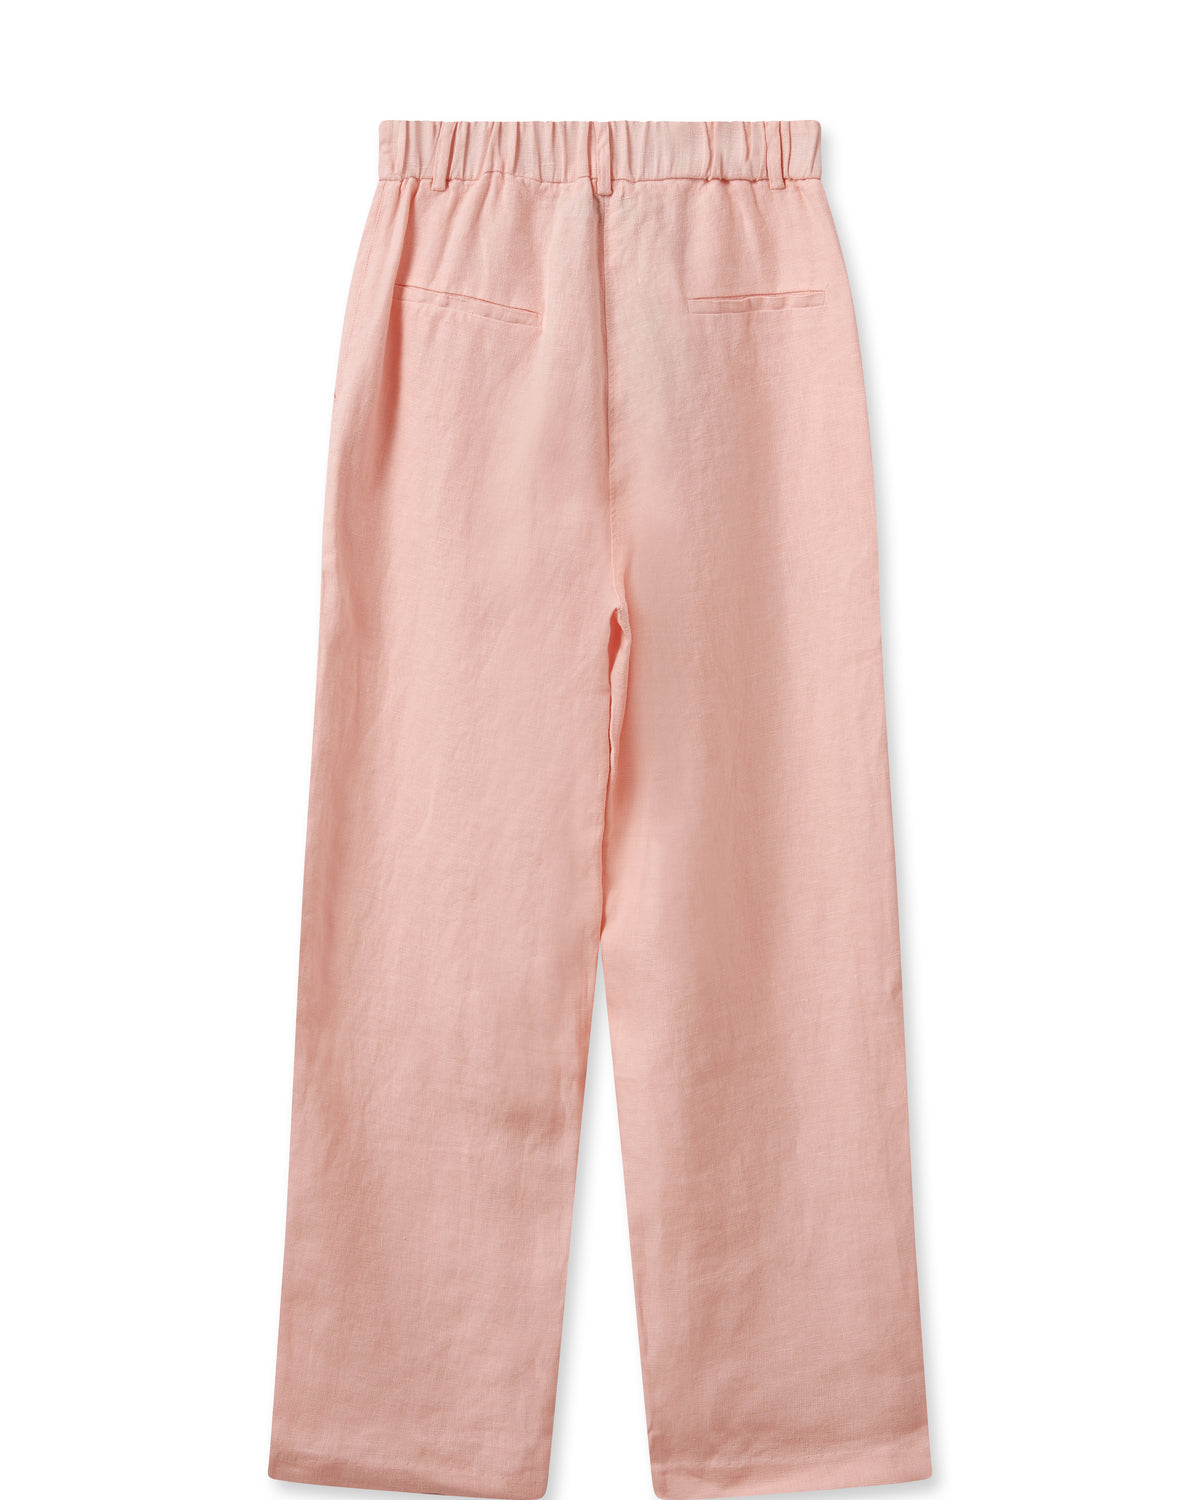 Regular cut pink linen trousers with zip and button fastening pleated front and side pockets